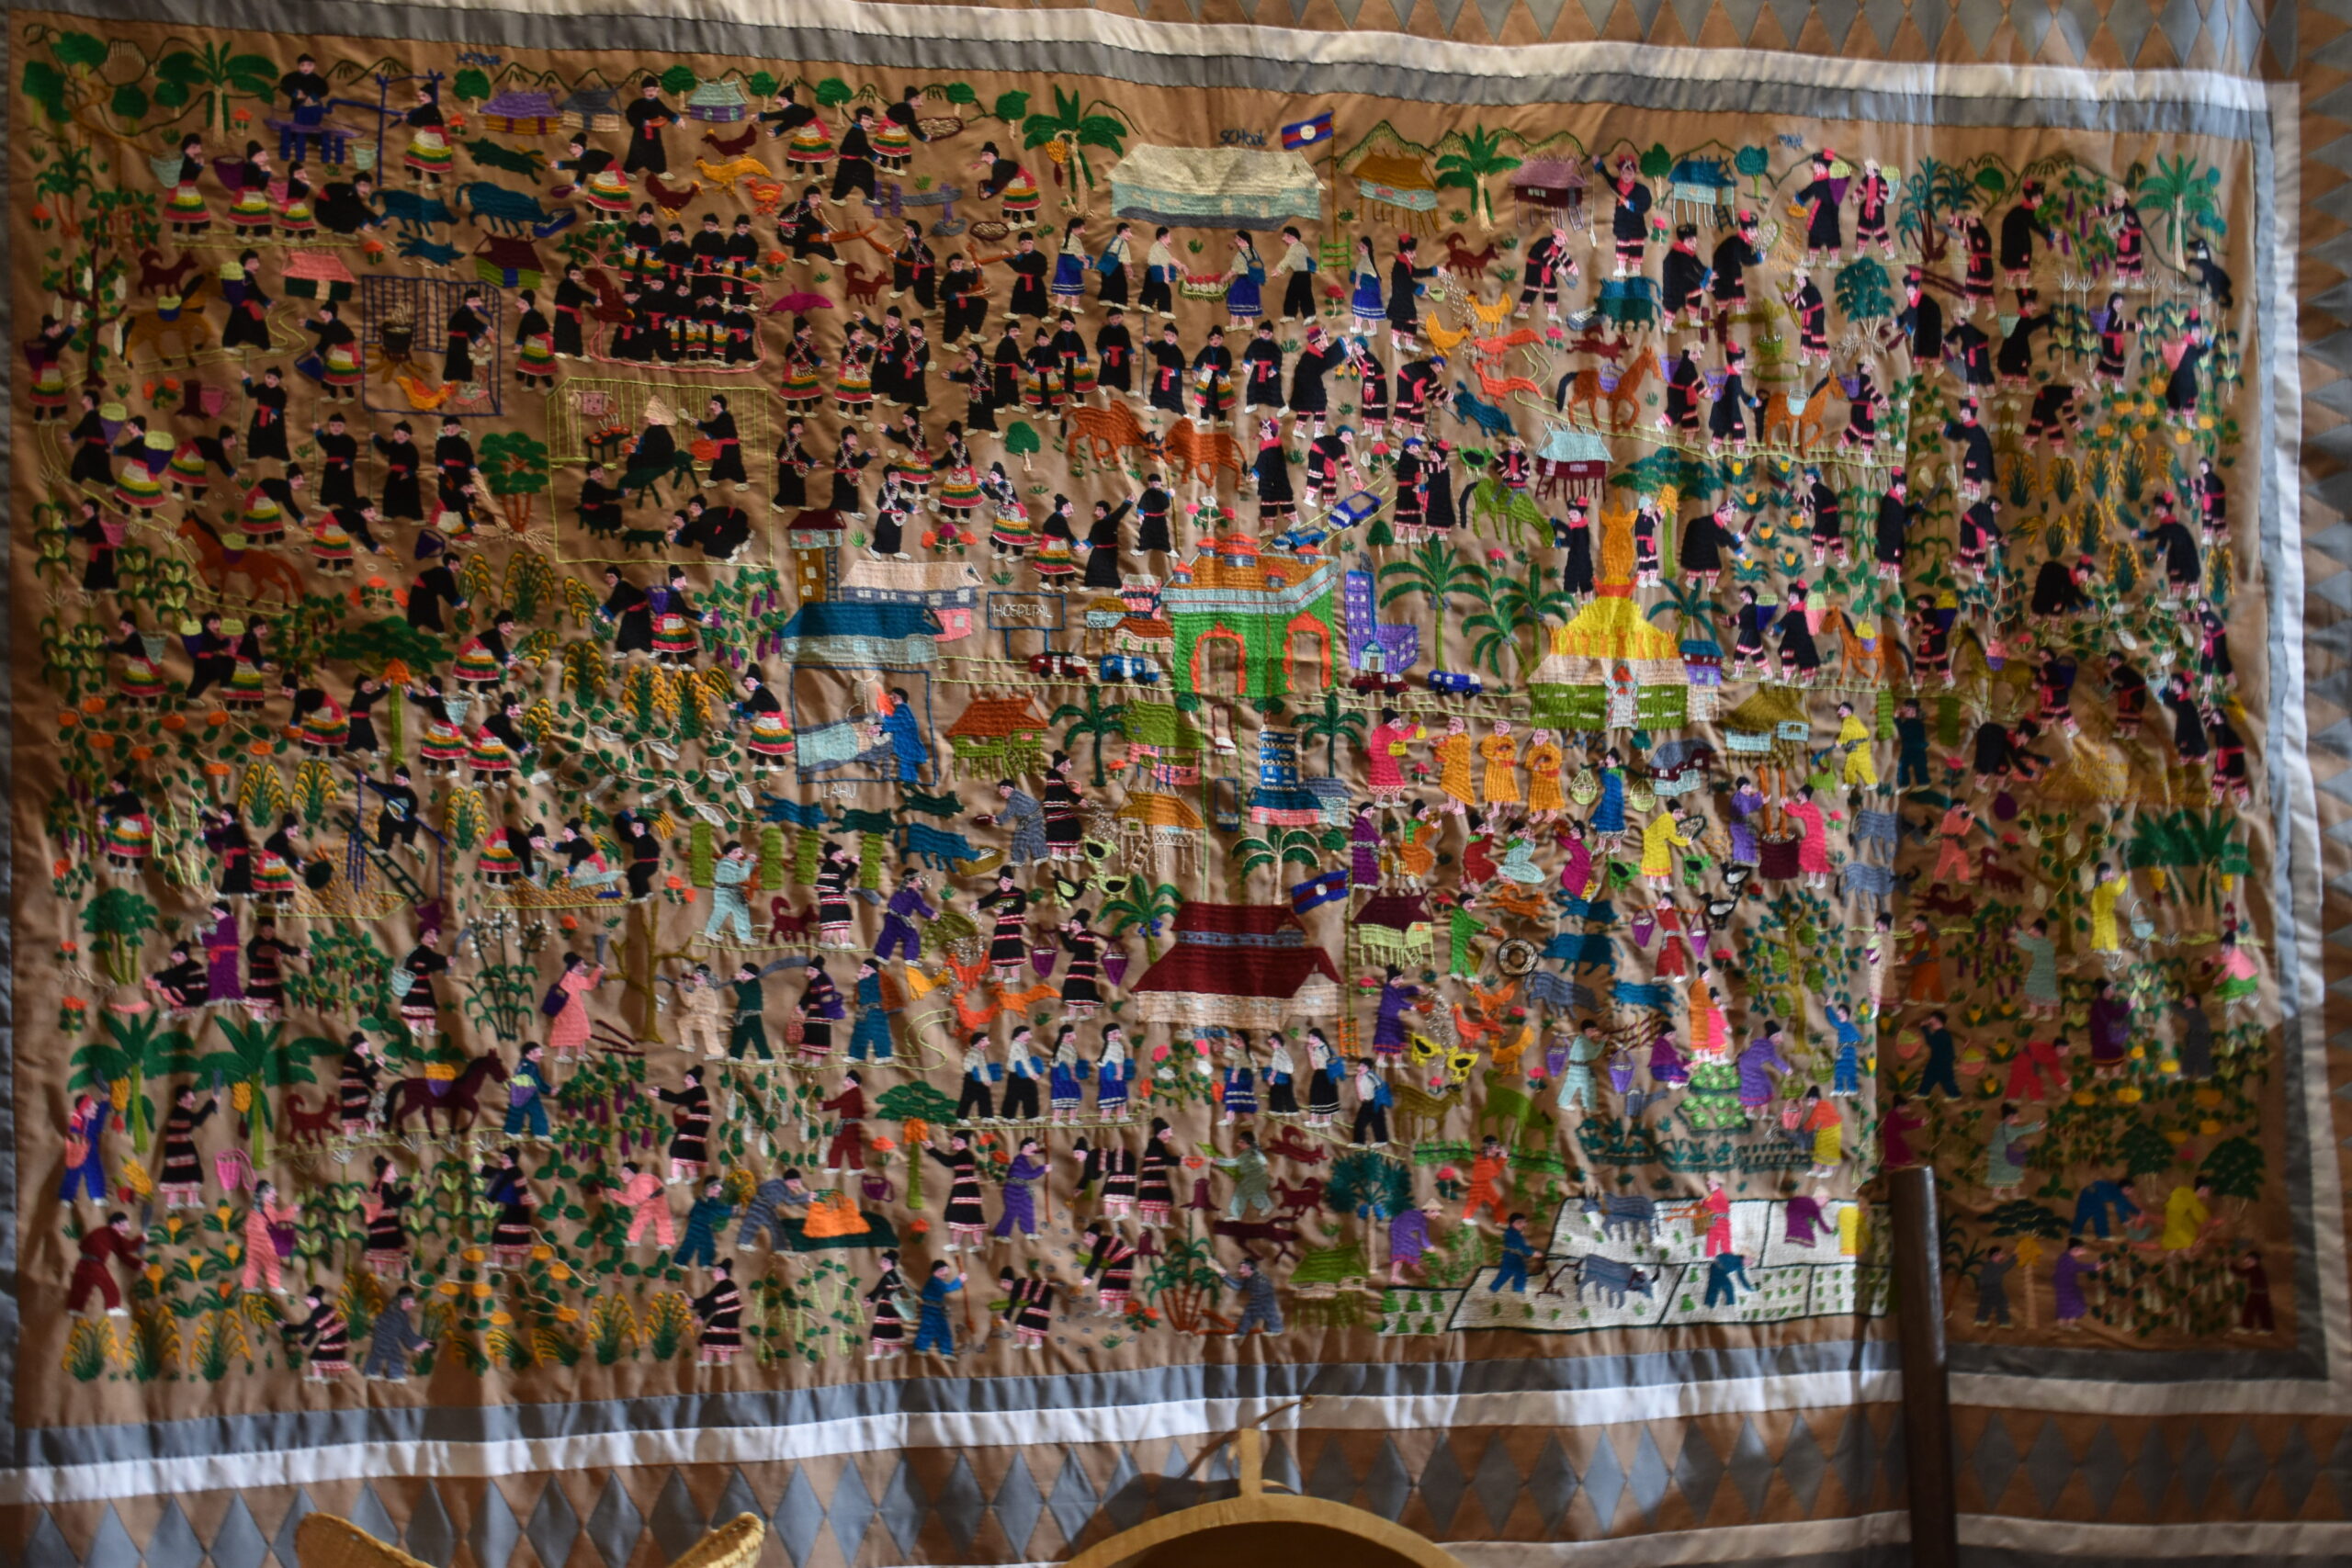 A Hmong story cloth hangs in the 